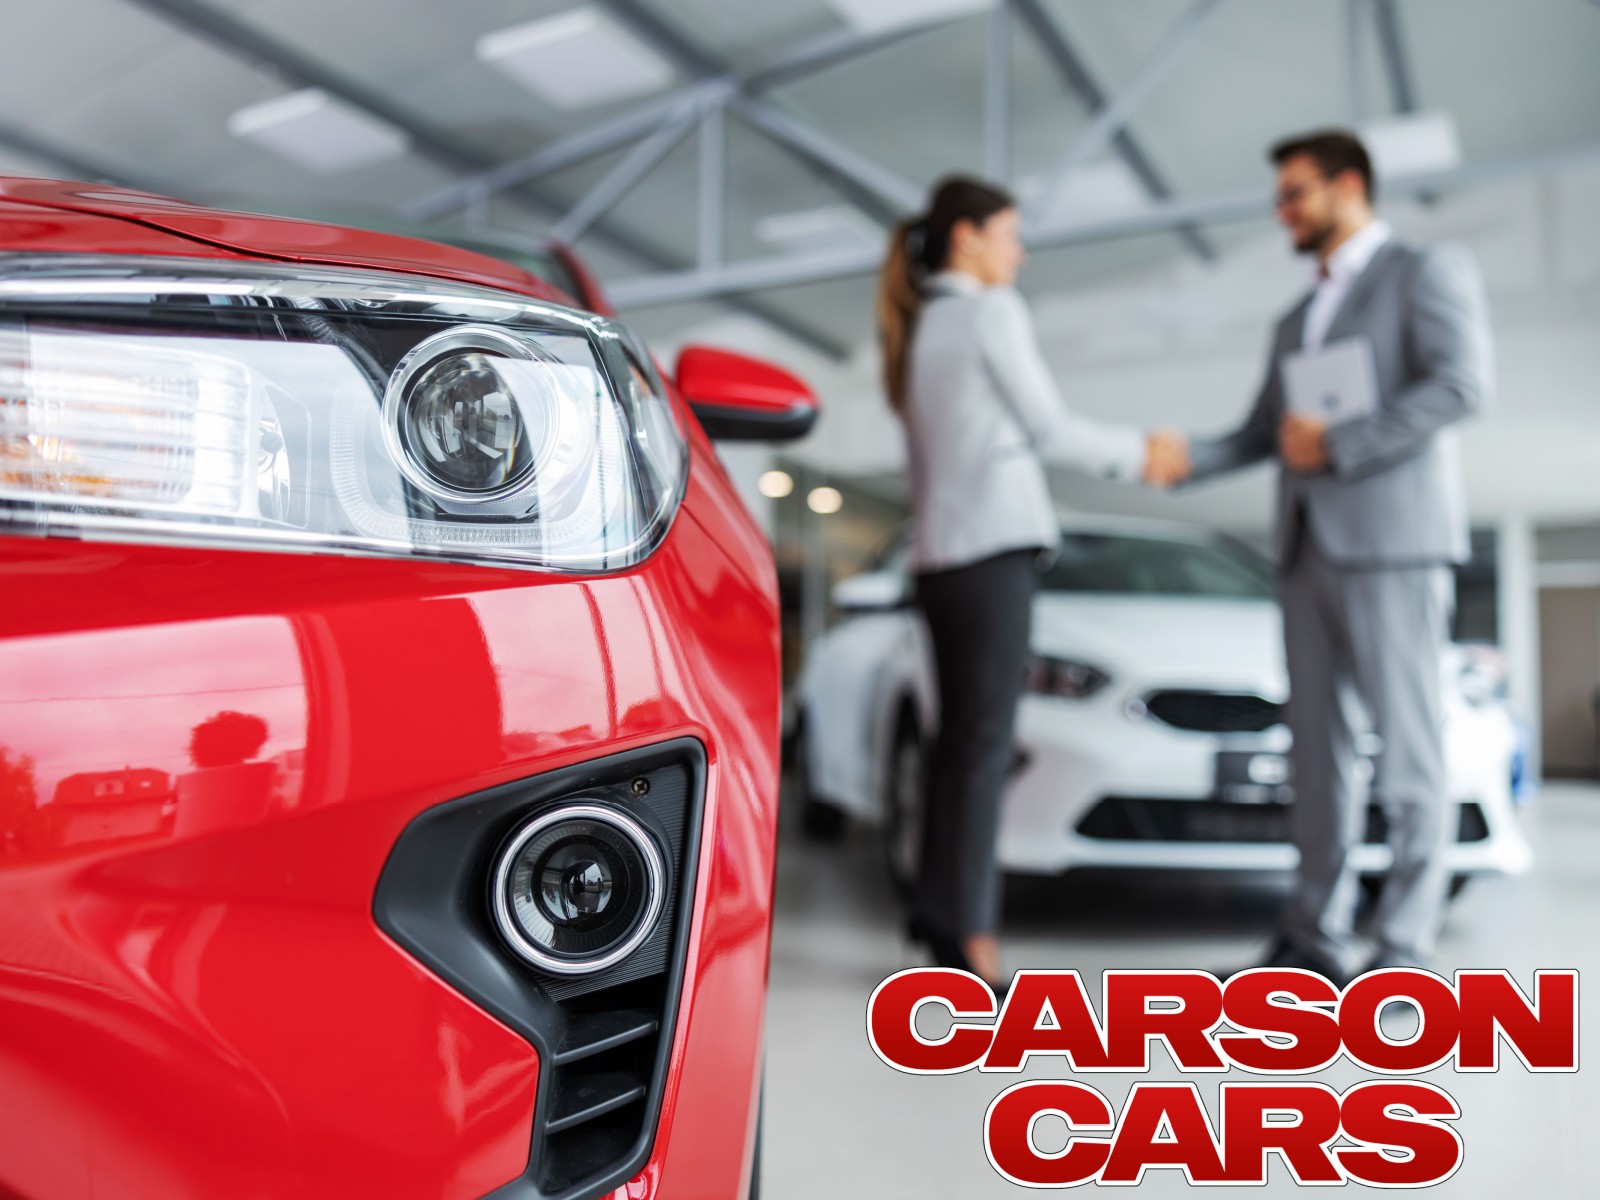 Drive Confidently with Carson Cars!